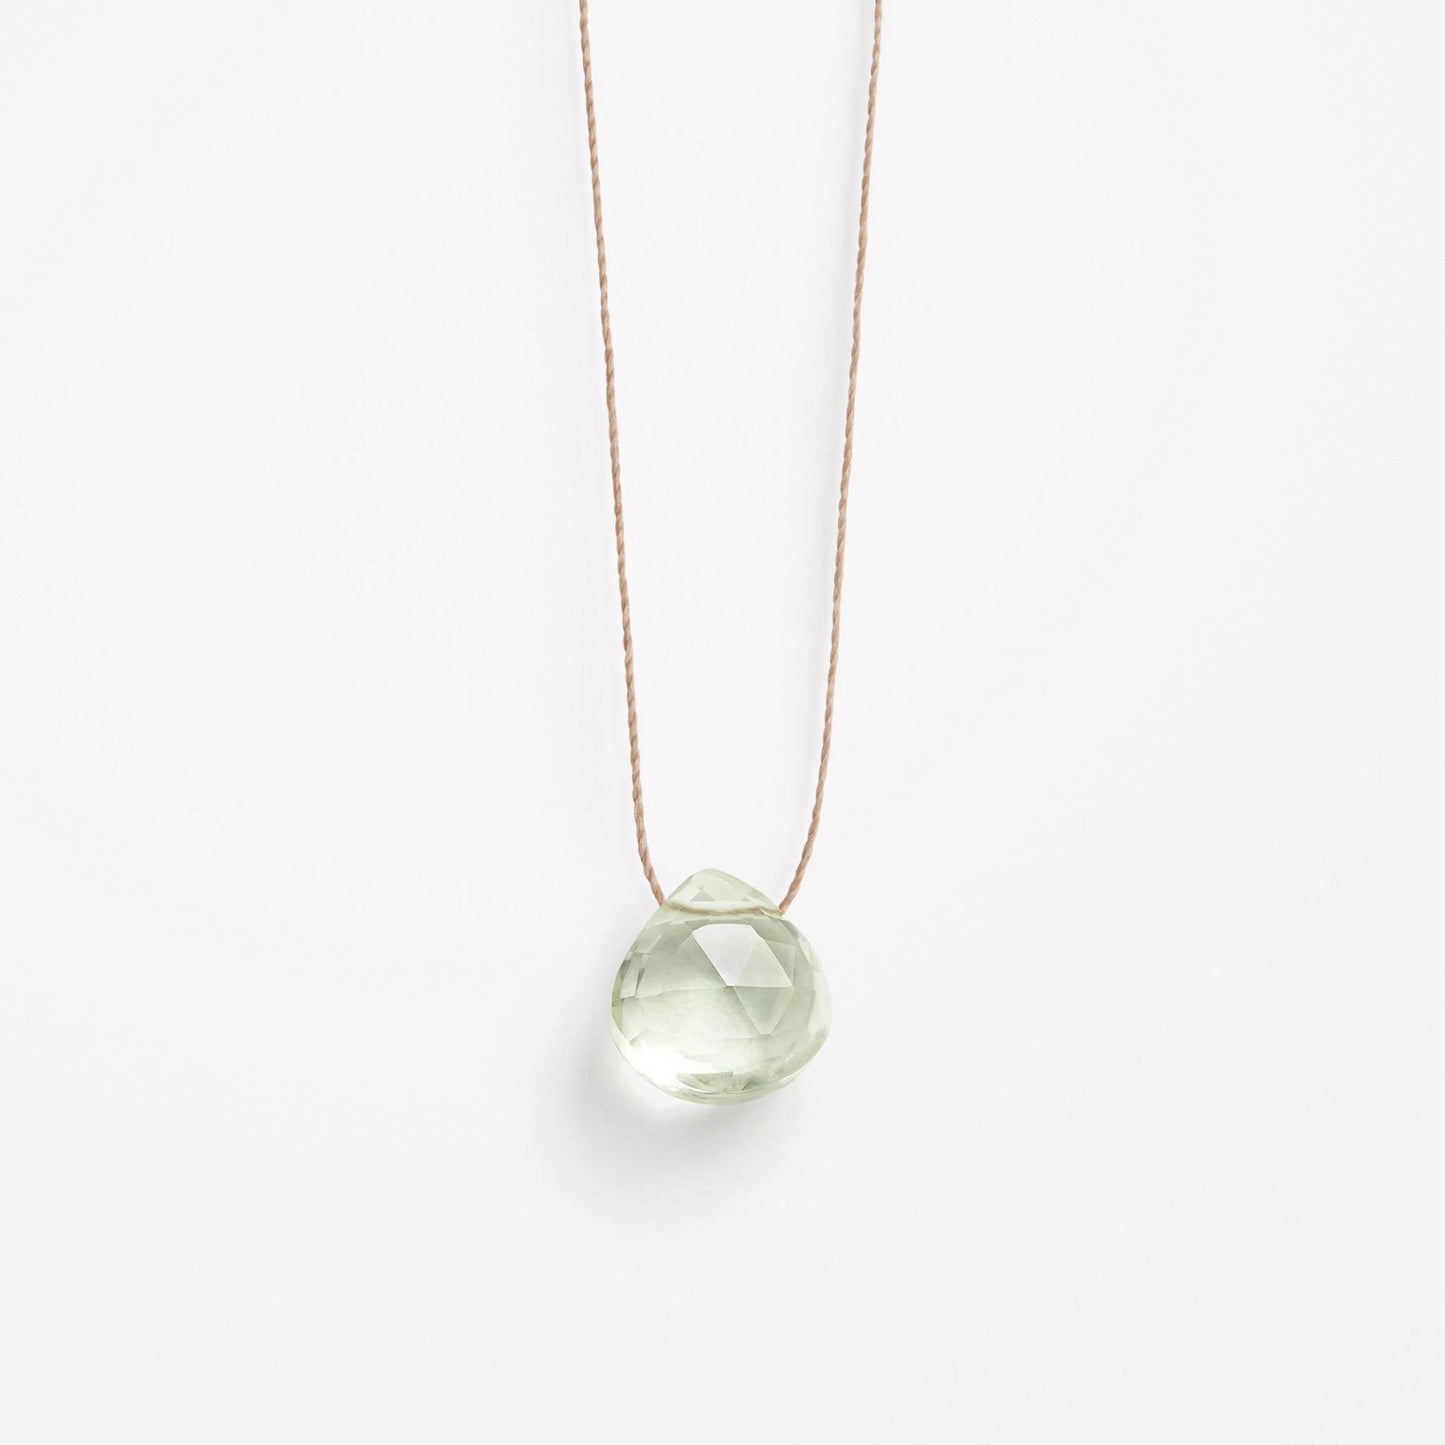 Wanderlust Life - Mint Green Amethyst Necklace Wanderlust Life The White Room